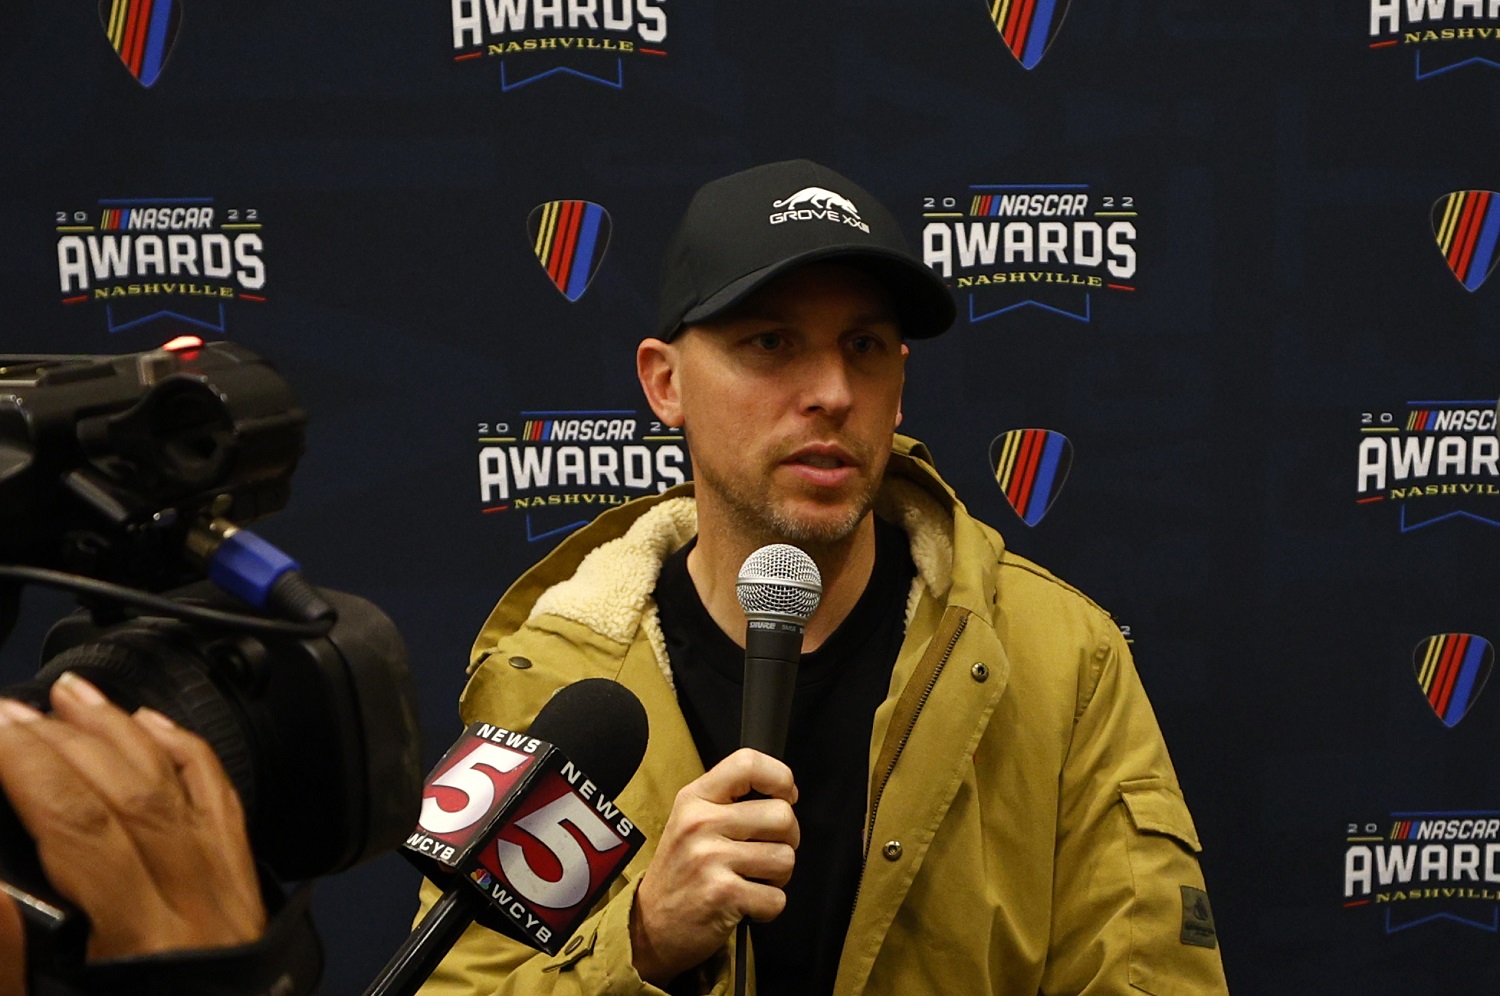 Denny Hamlin speaks with the media prior to the NASCAR Awards and Champion Celebration at the Music City Center on Dec. 2, 2022, in Nashville, Tennessee.